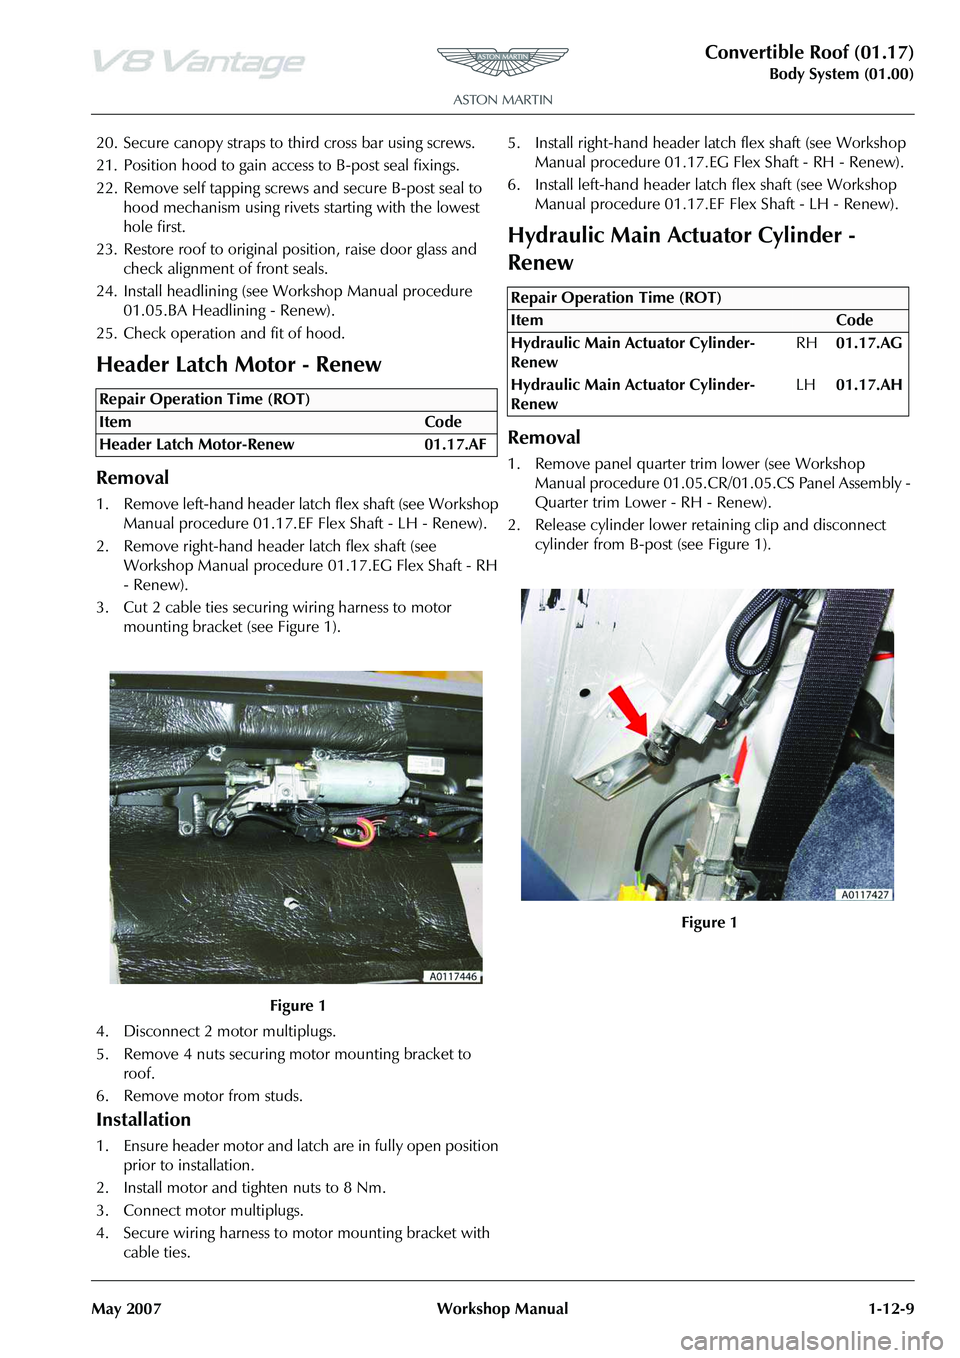 ASTON MARTIN V8 VANTAGE 2010  Workshop Manual Convertible Roof (01.17)
Body System (01.00)
May 2007 Workshop Manual 1-12-9
20. Secure canopy straps to third cross bar using screws.
21. Position hood to gain access to B-post seal fixings.
22. Remo